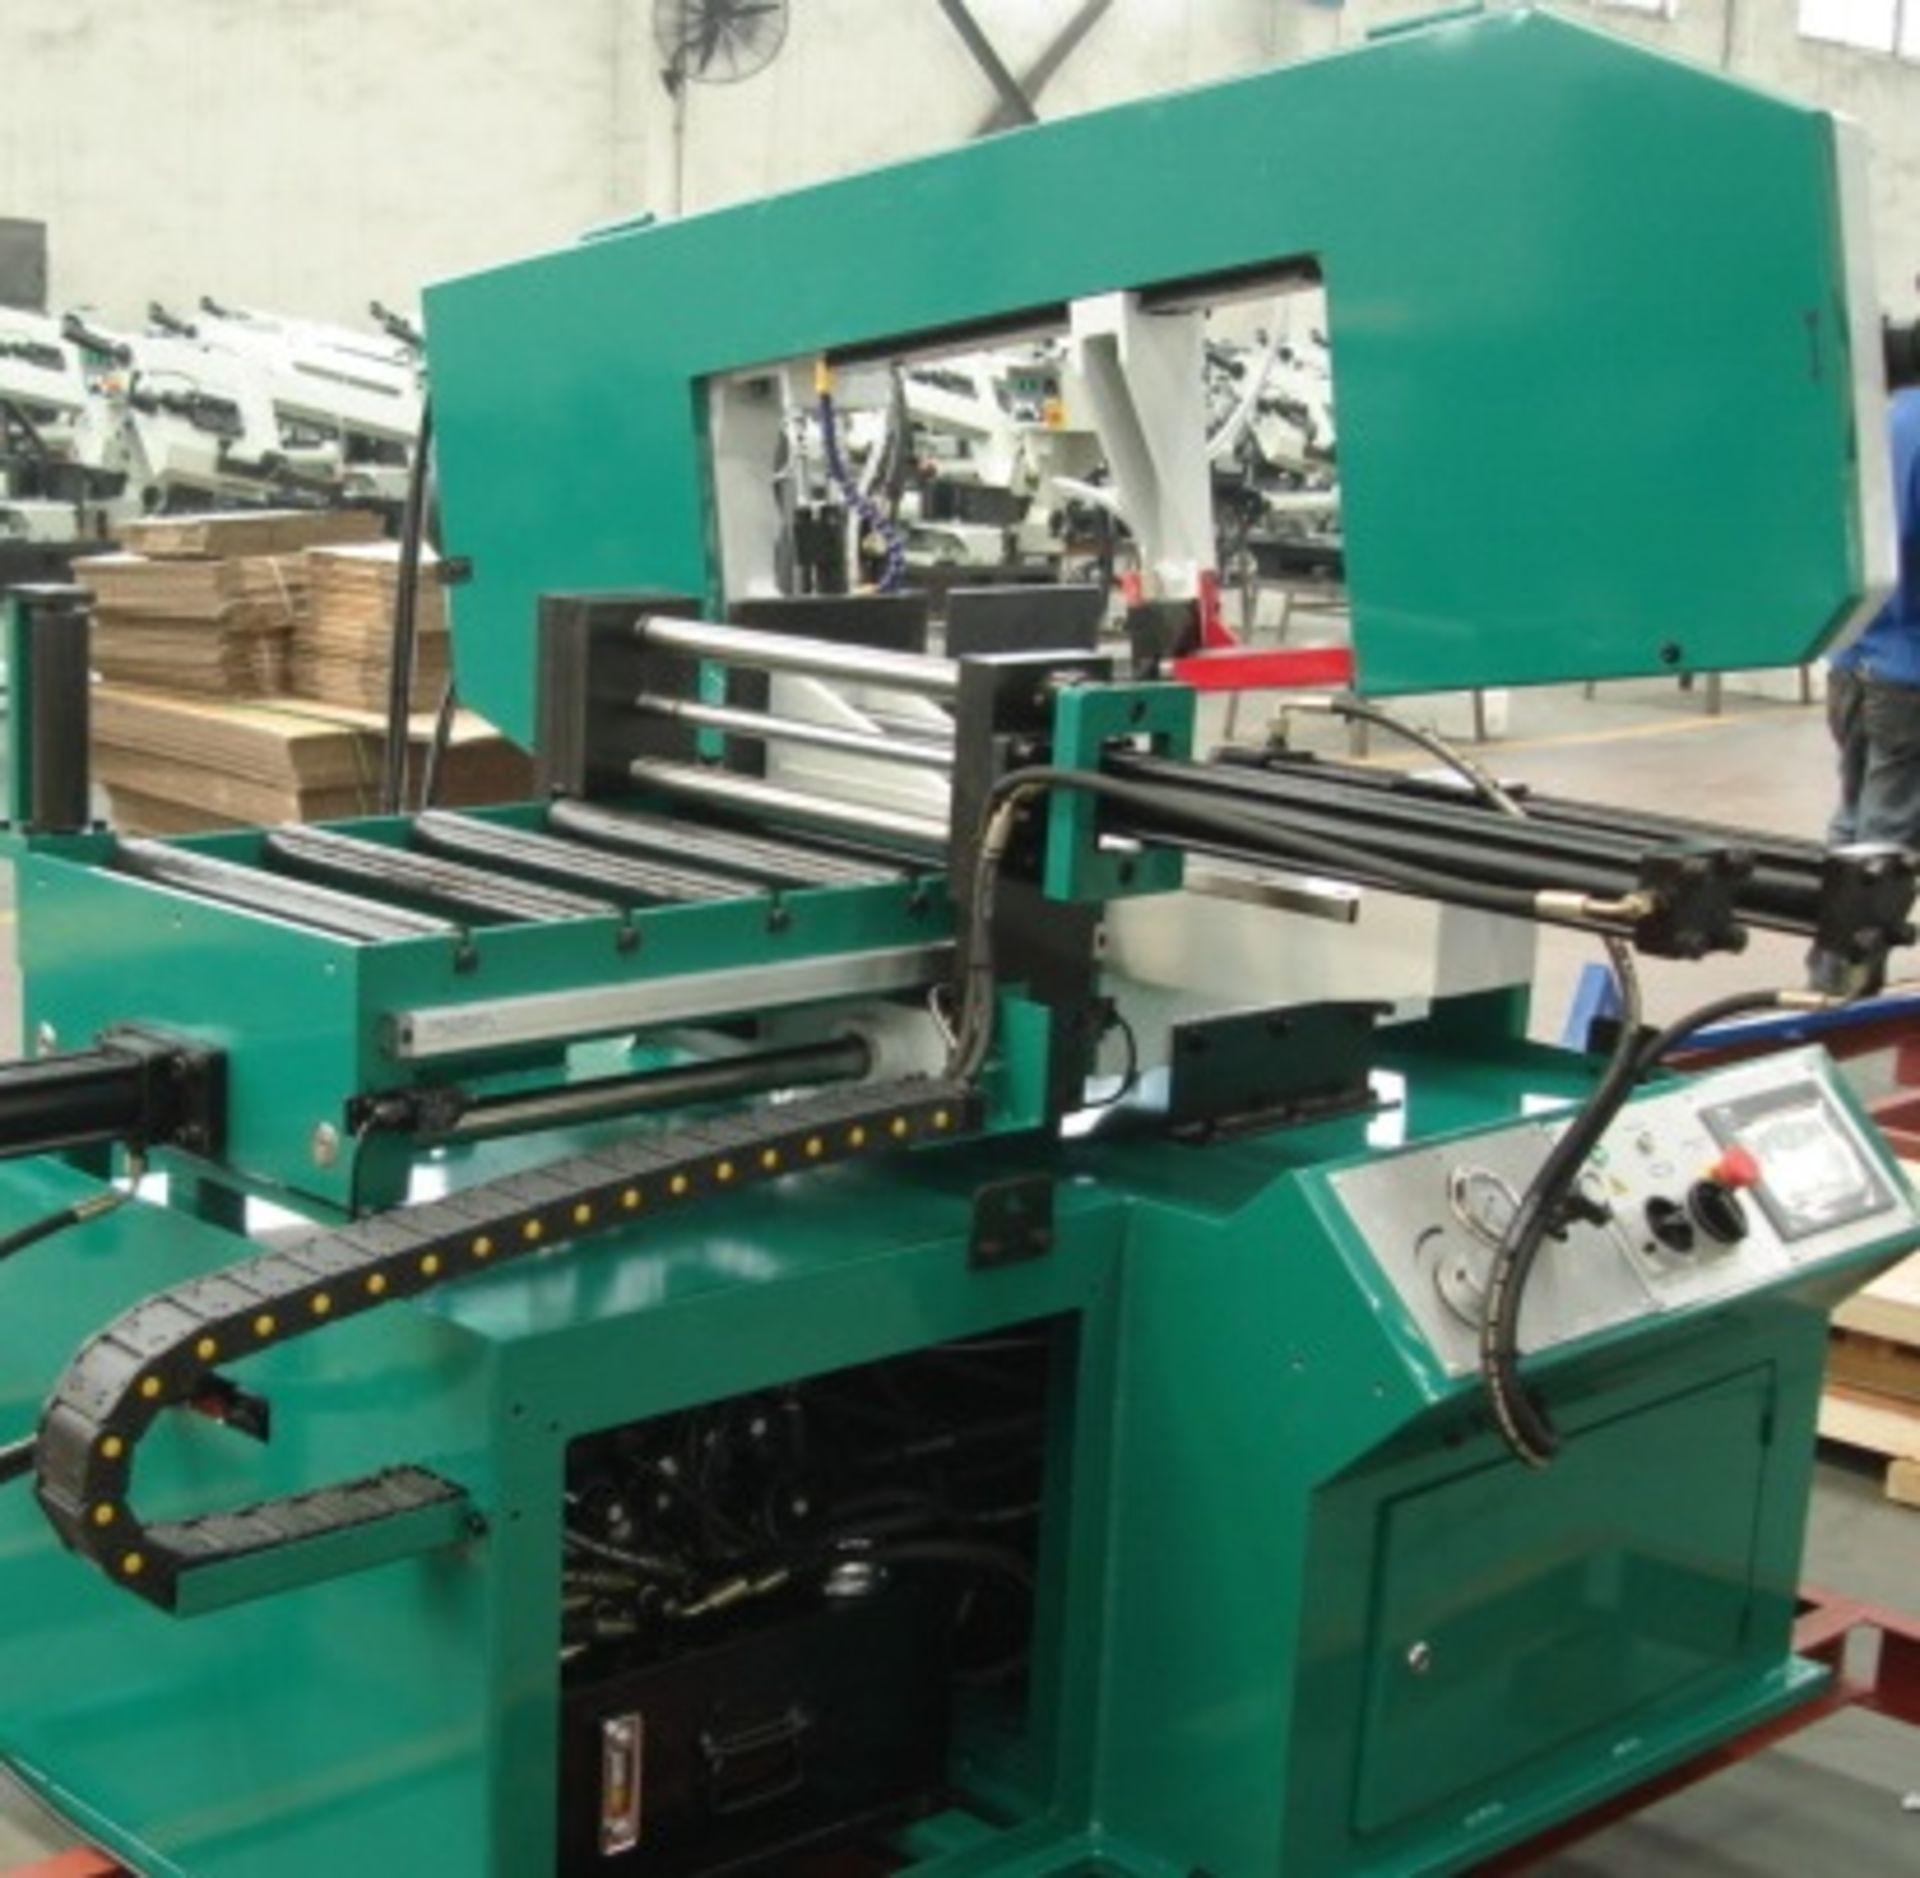 BS-460G Fully Automatic CNC Horizontal Band Saw 220V 3 phase with 18 X 13 inch CAPACITY and CNC - Image 2 of 3